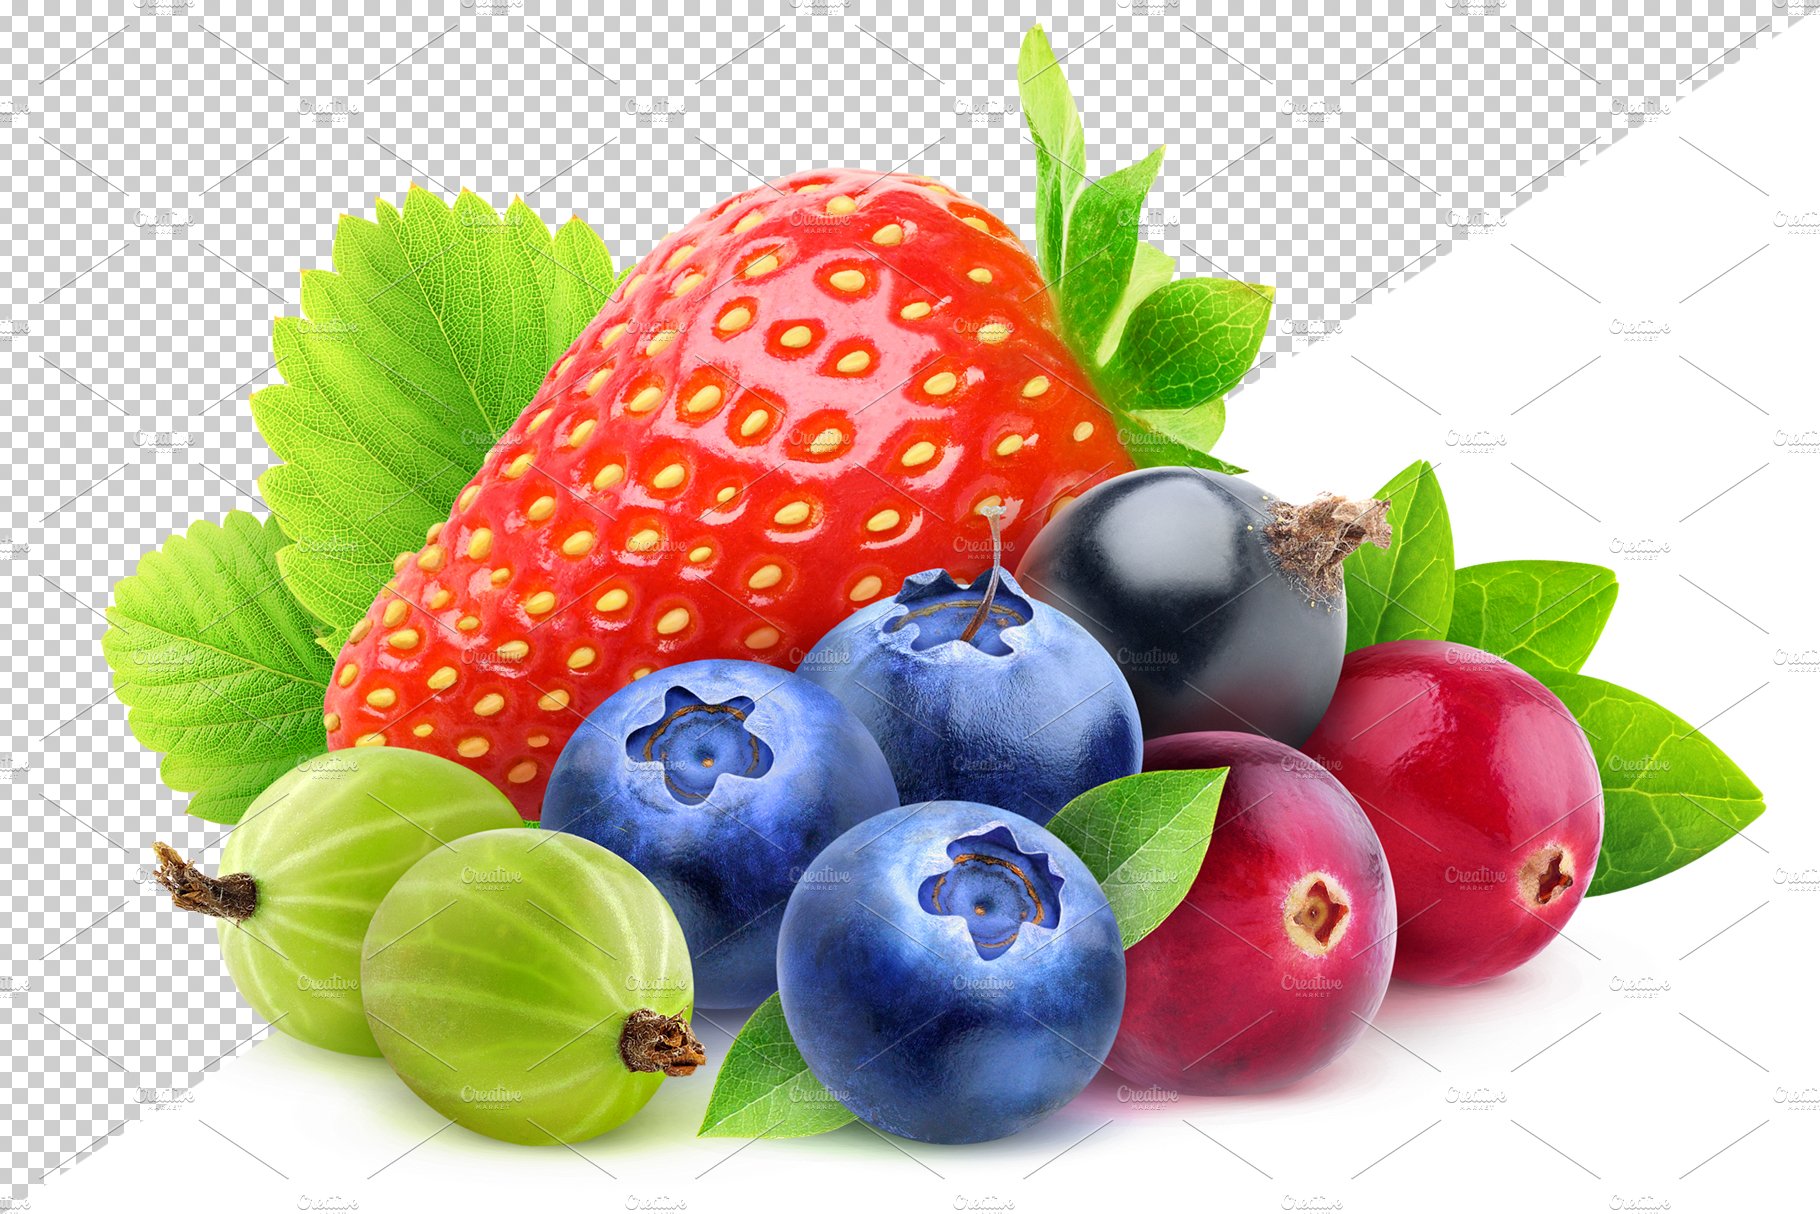 Isolated berries preview image.